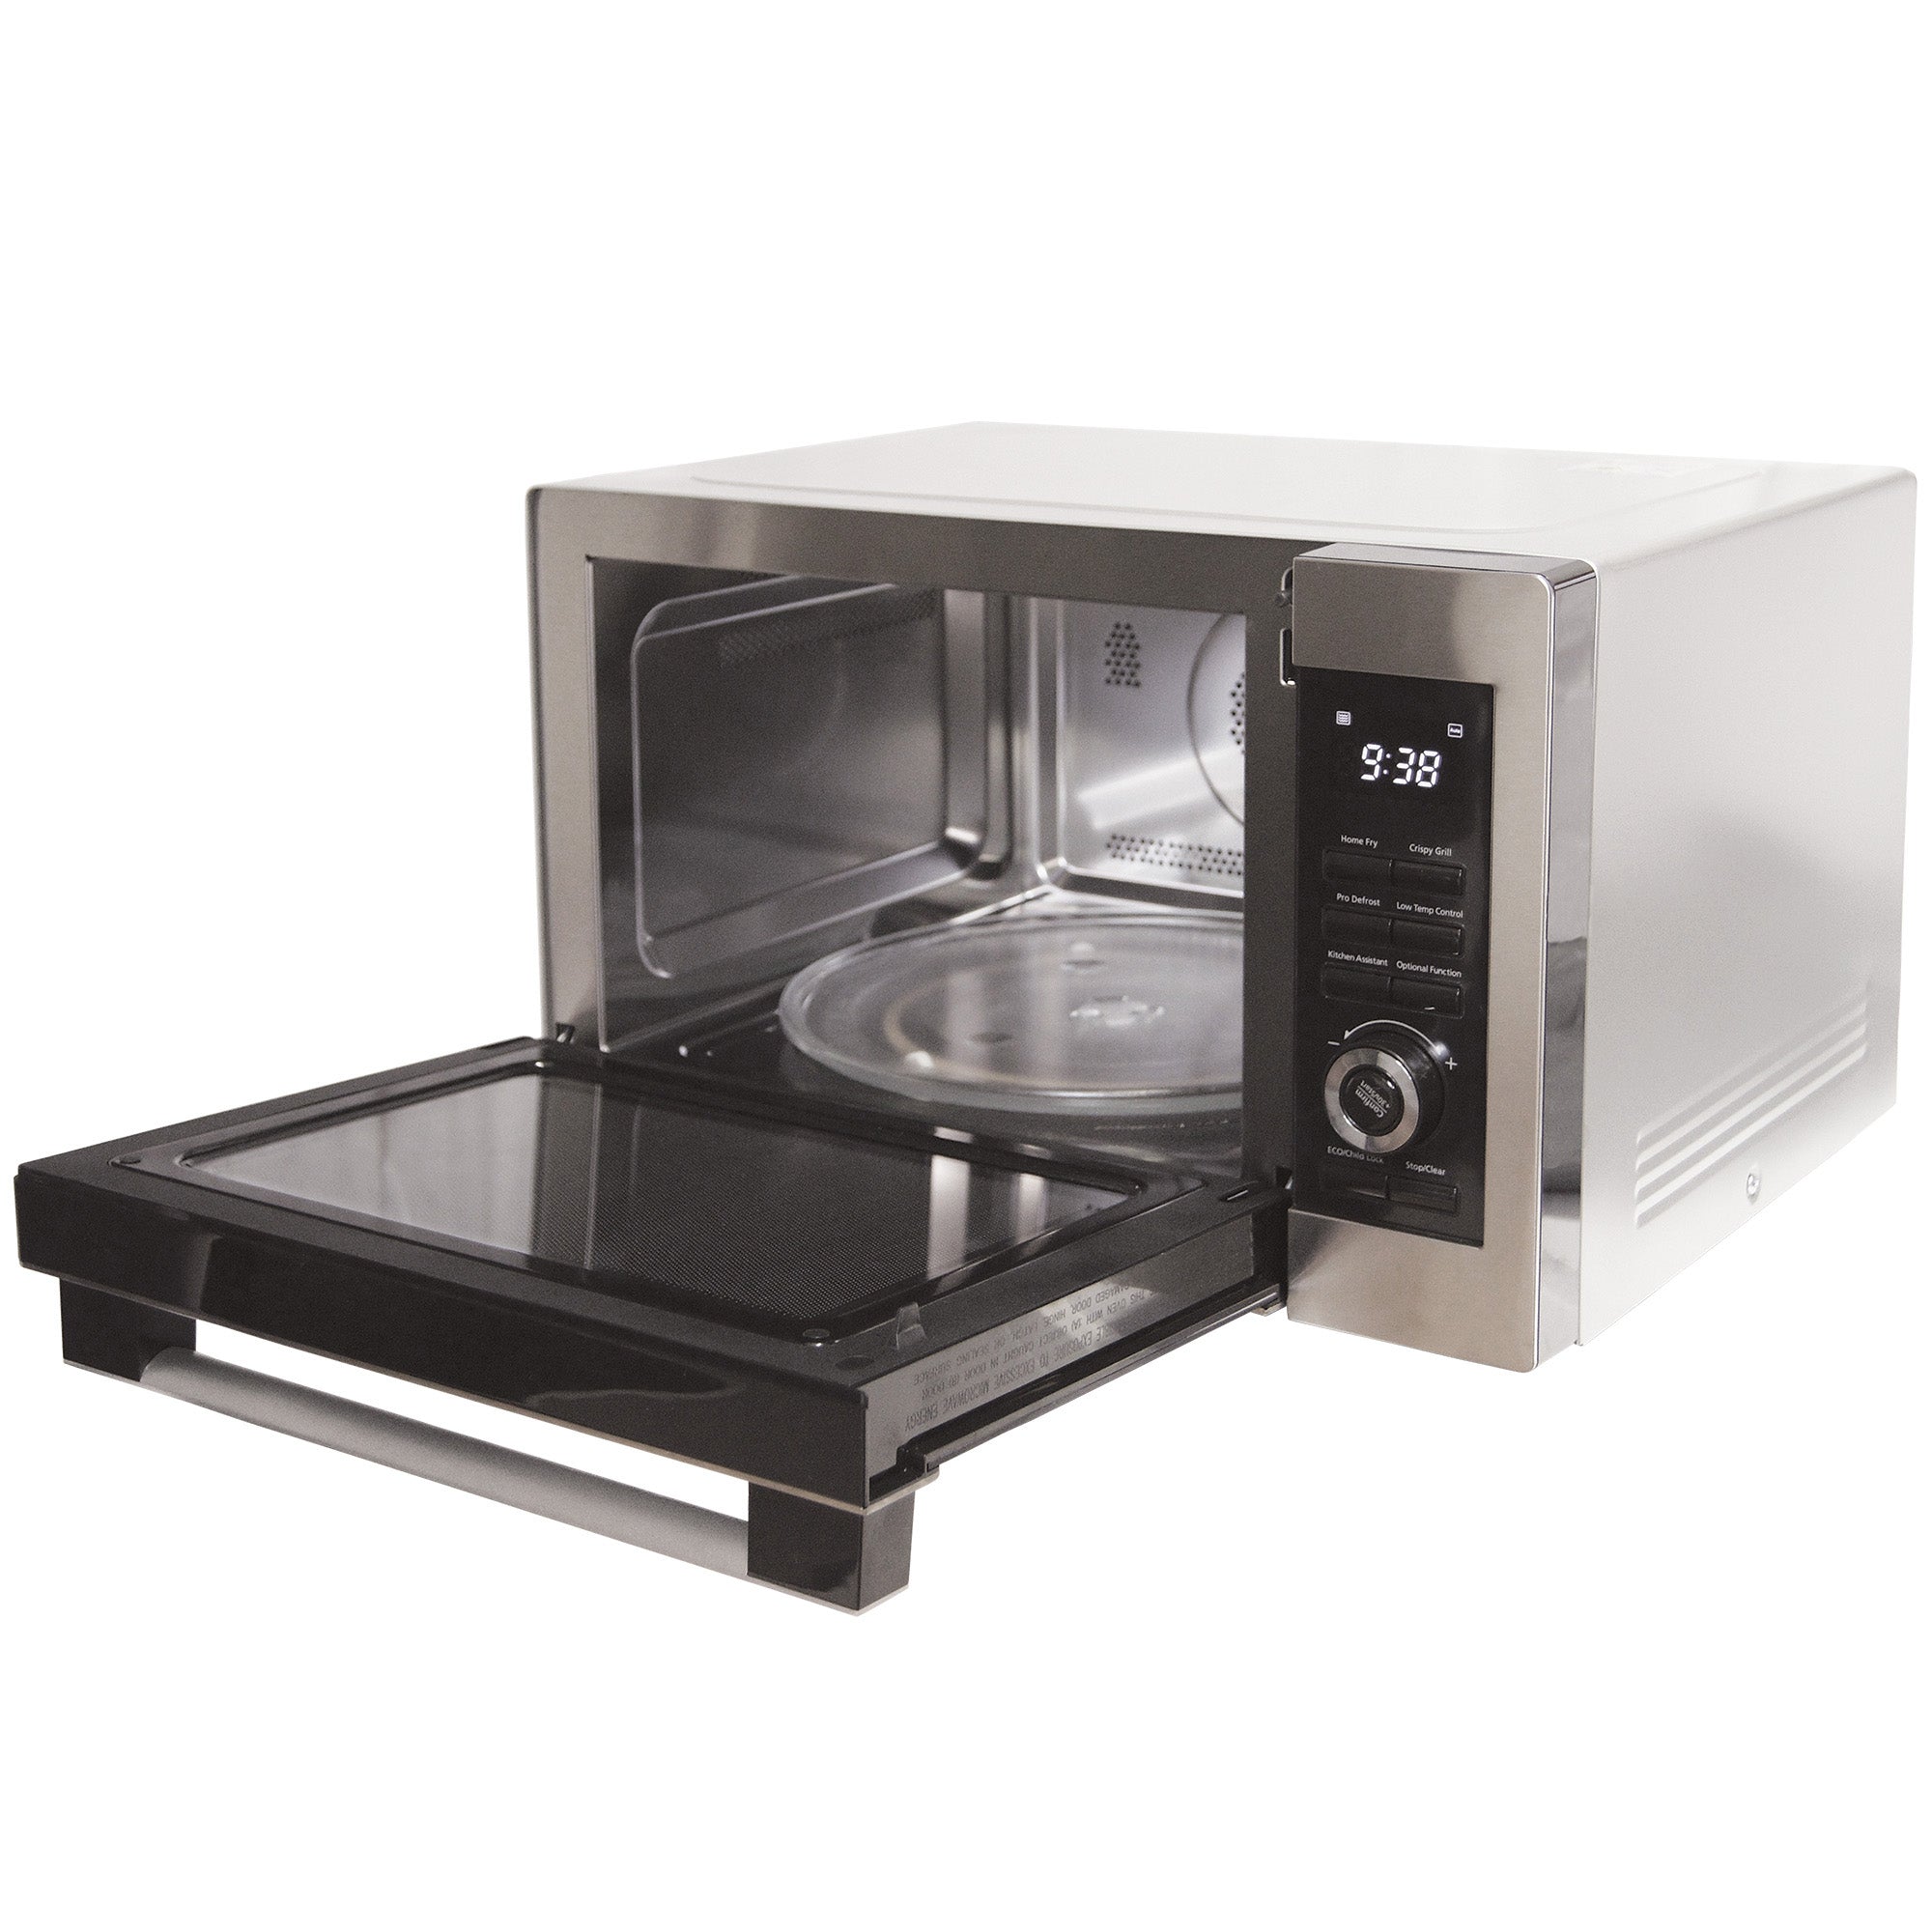 Digital Combination Microwave with Grill, 30 Litre Capacity, 1000W